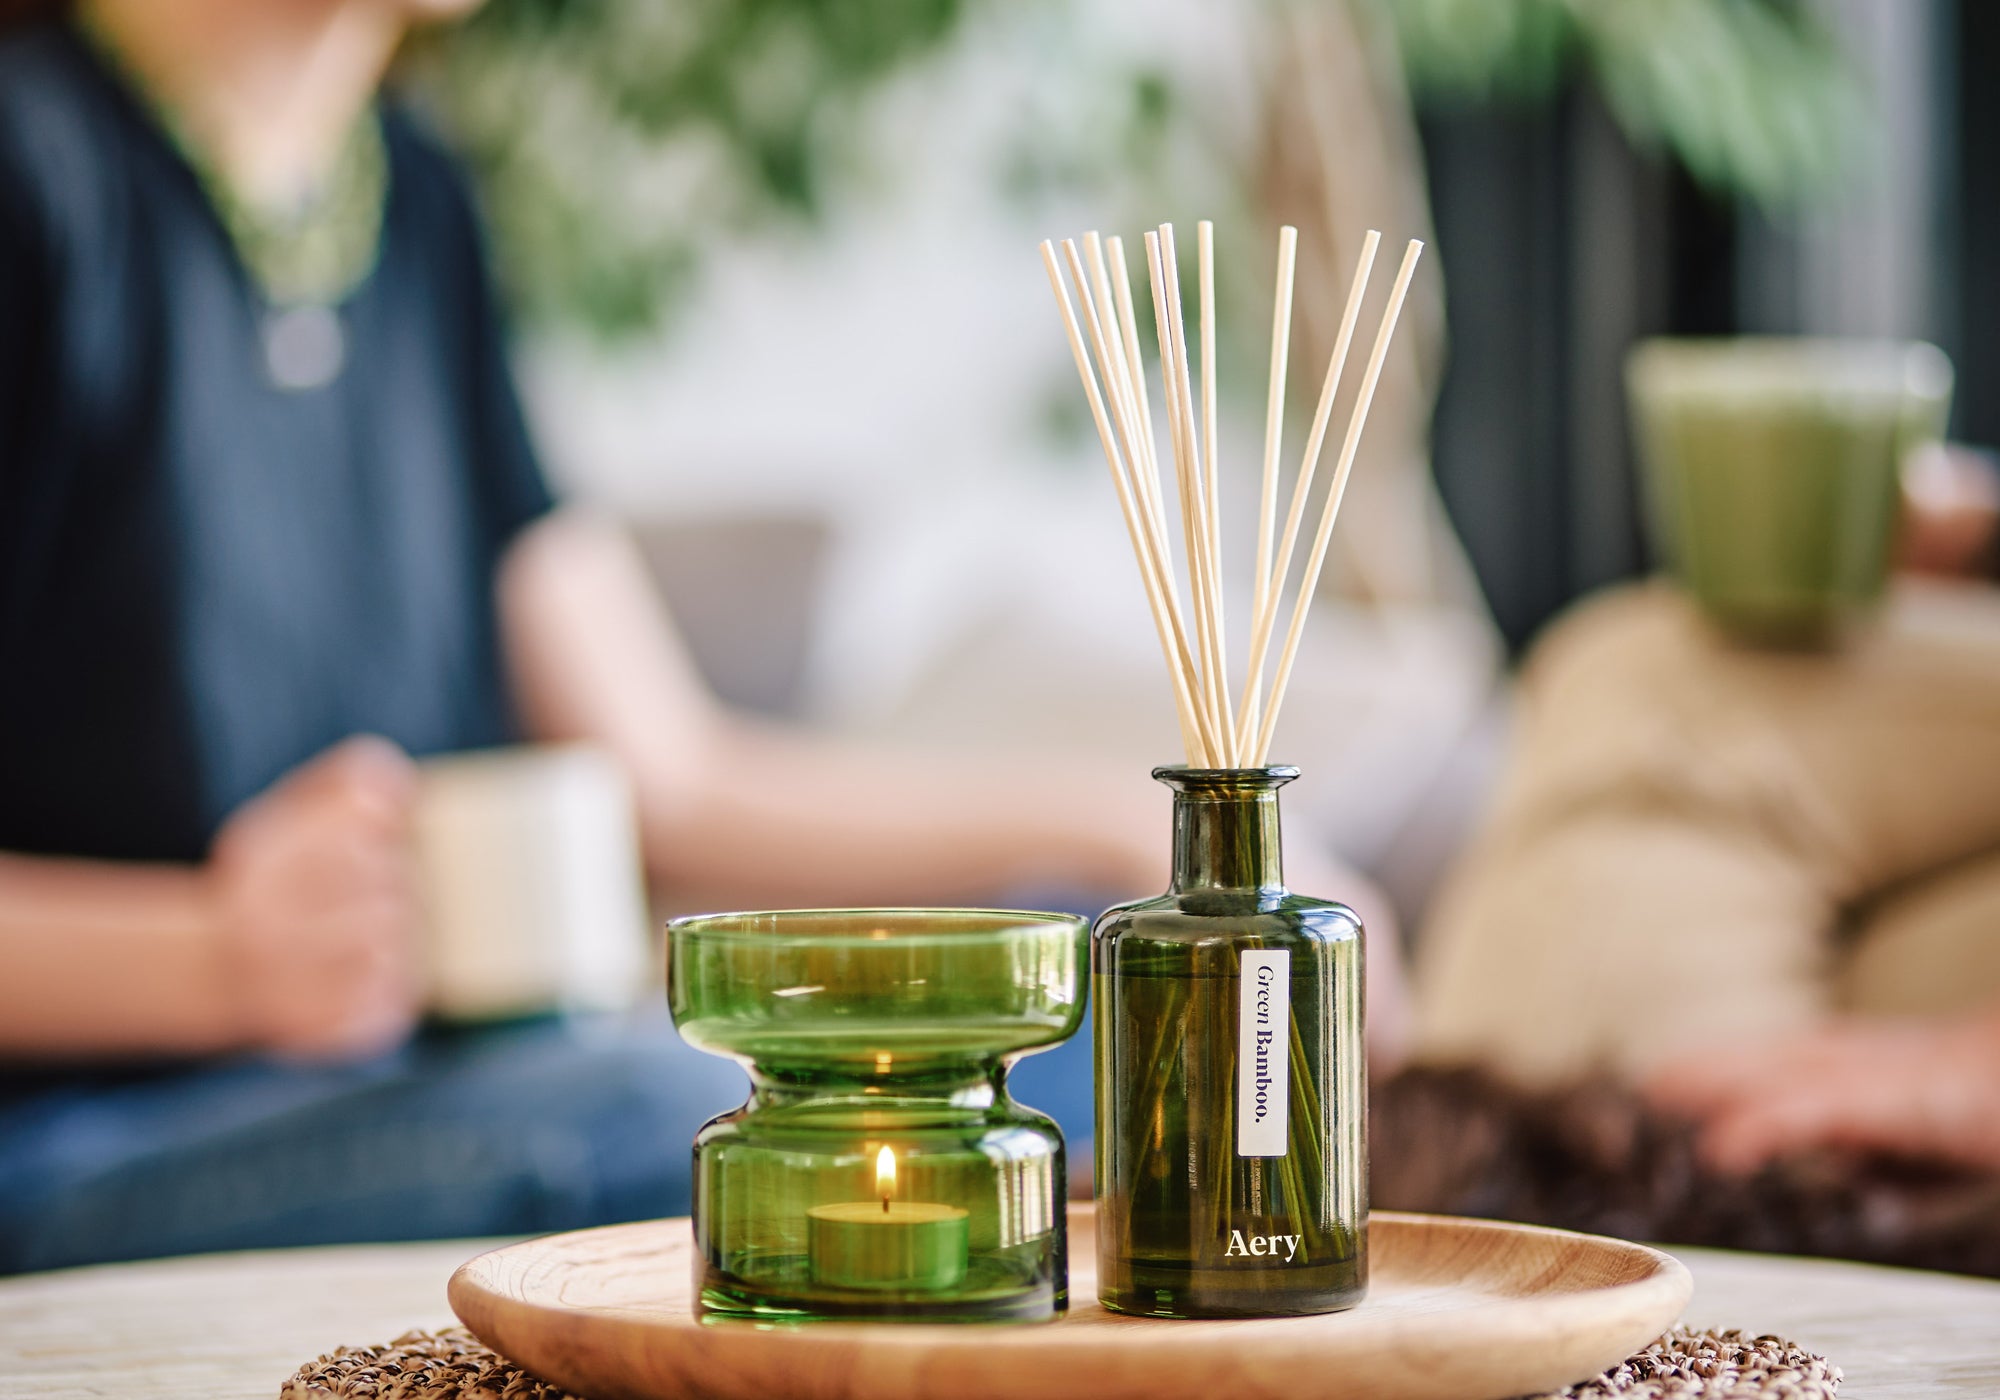 green bamboo aery living green glass reed diffuser displayed on coffee table next to decorative green tea light holder with two people in the background